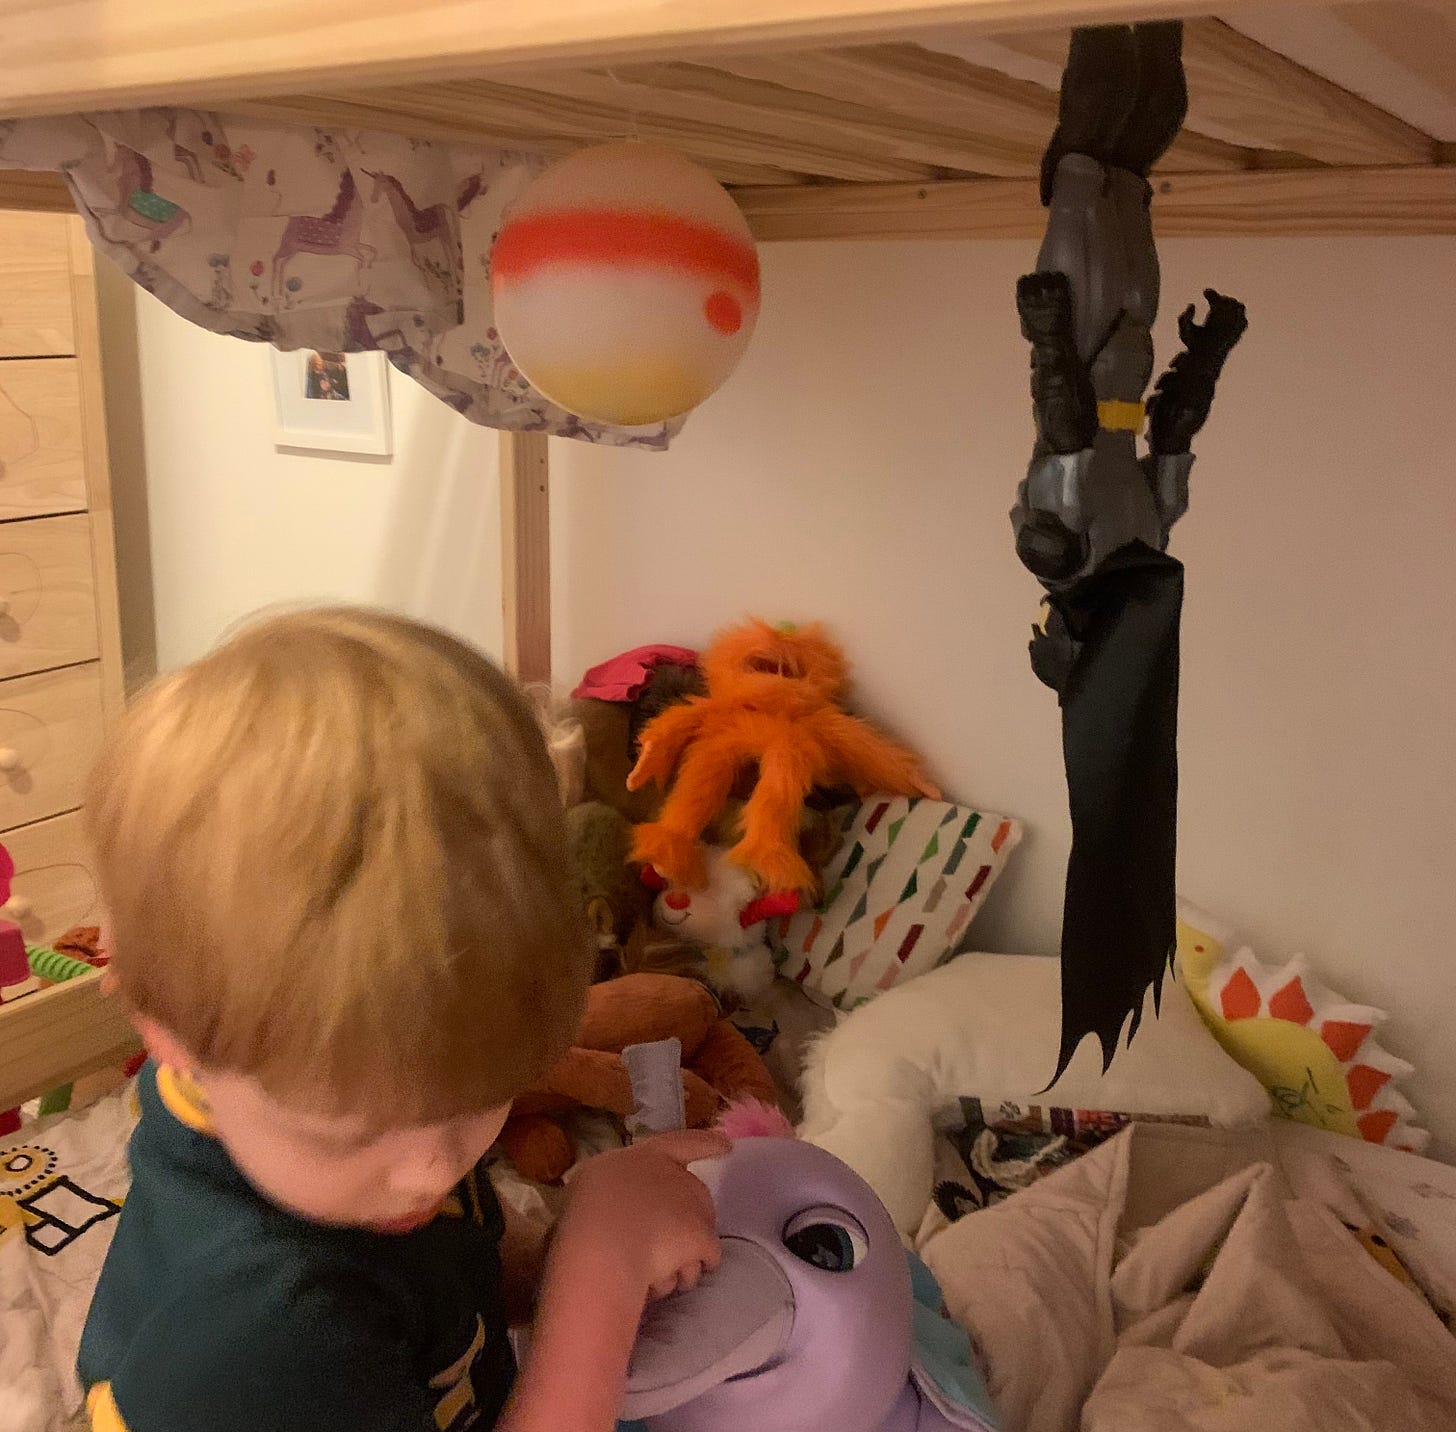 Batman hangs upside down from a bunk bed, staring at a toy Jupiter, as a child plays